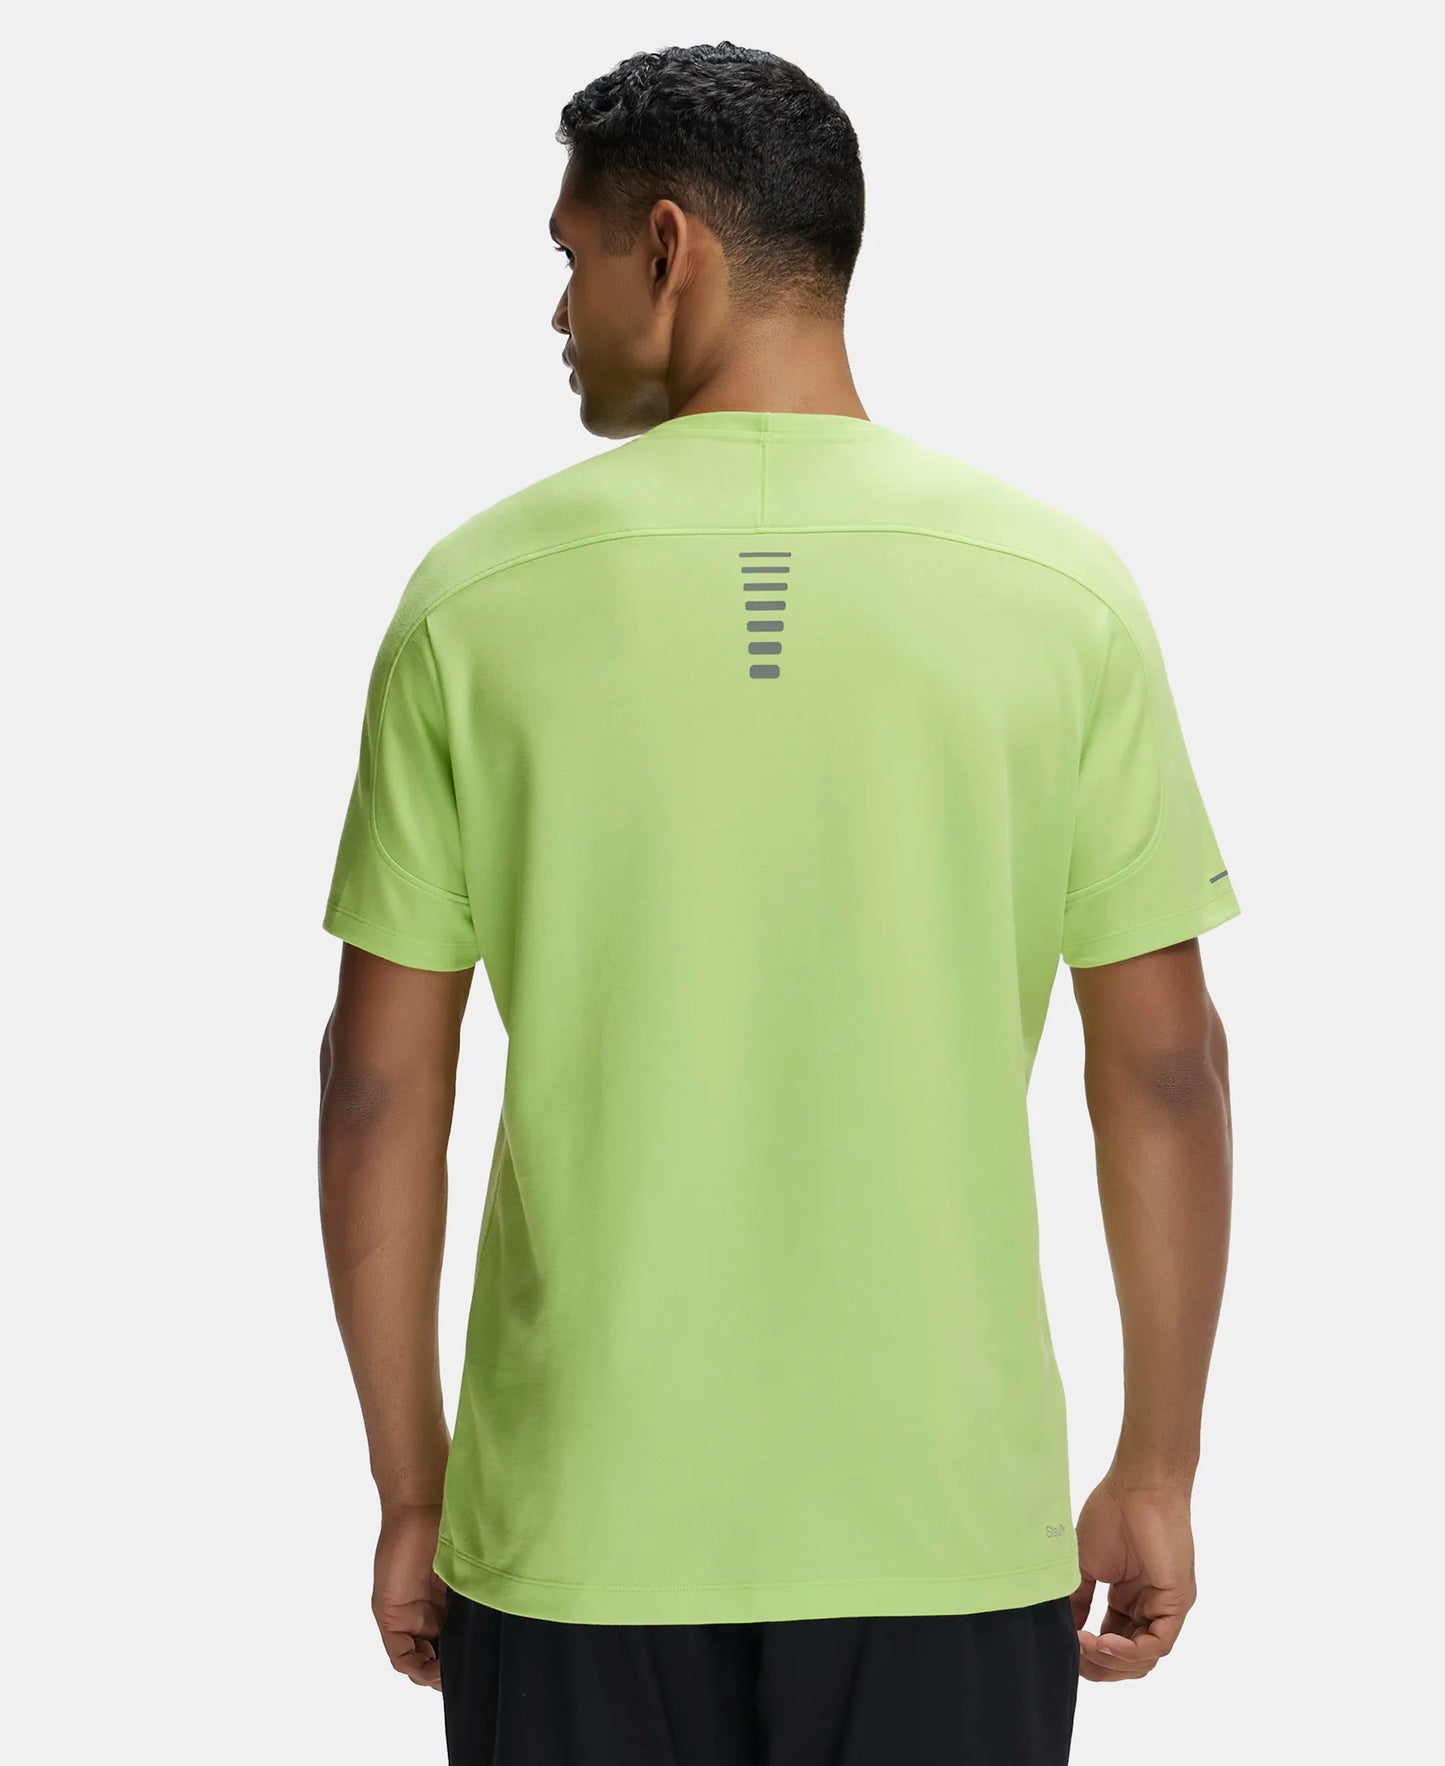 Super Combed Cotton Blend Solid Round Neck Half Sleeve T-Shirt with Breathable Mesh - Green Glow-3